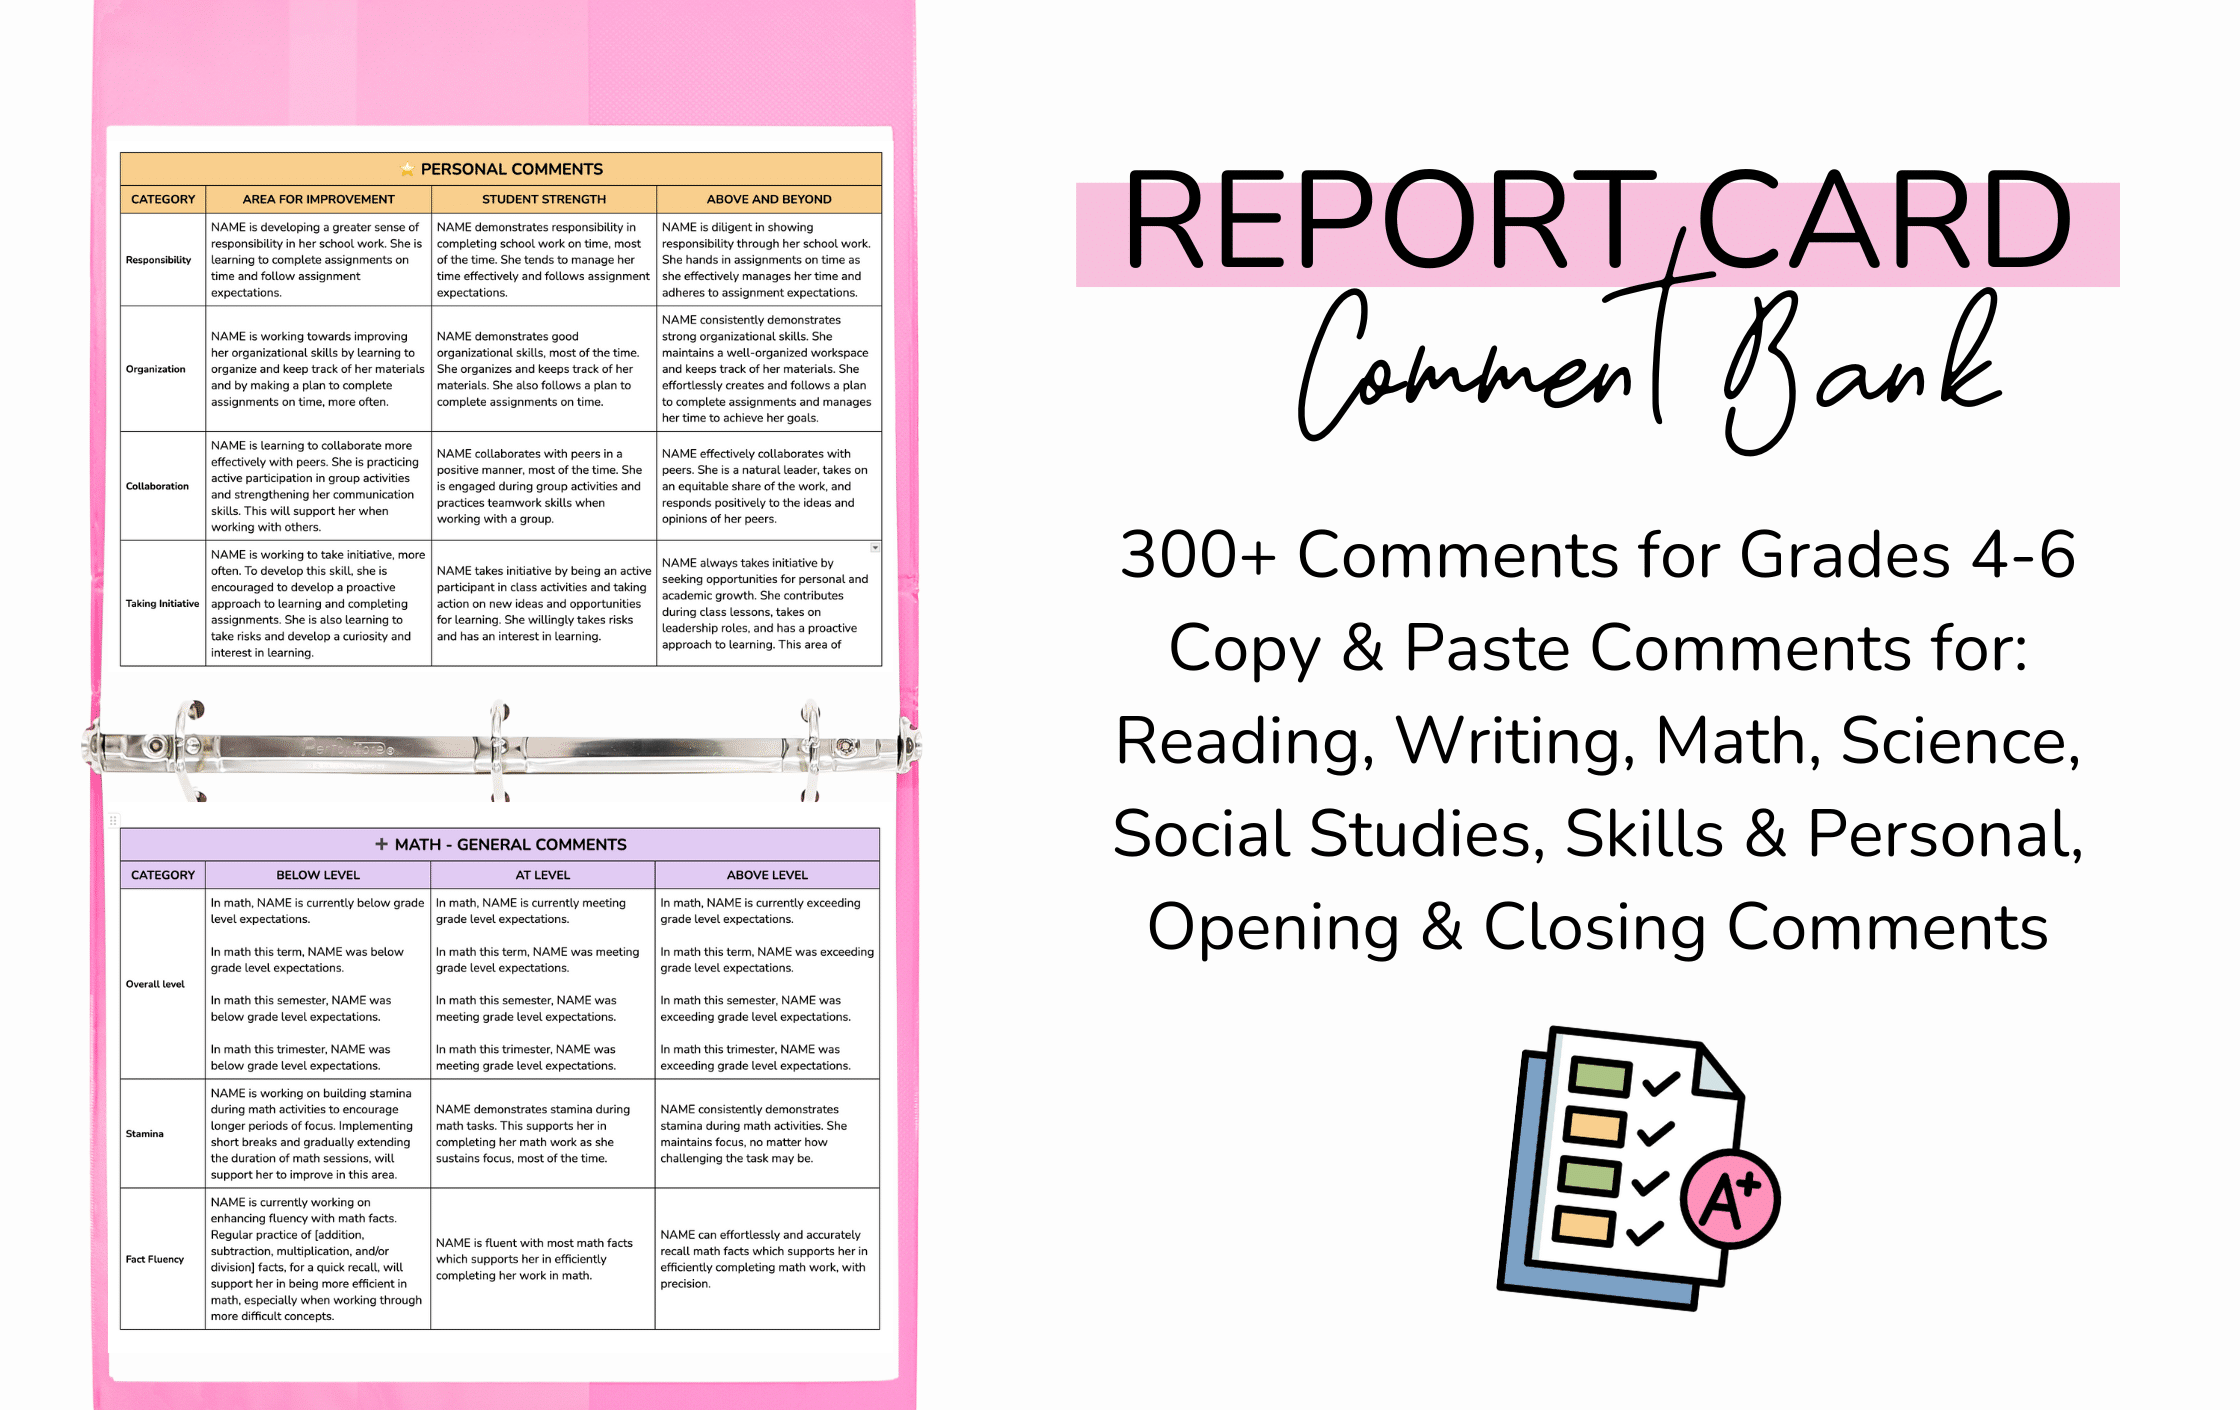 Pages from the copy and paste report card comment bank in a hot pink binder with title "Report Card Comment Bank" and a list outlining the subjects and skills that report card comments are included for